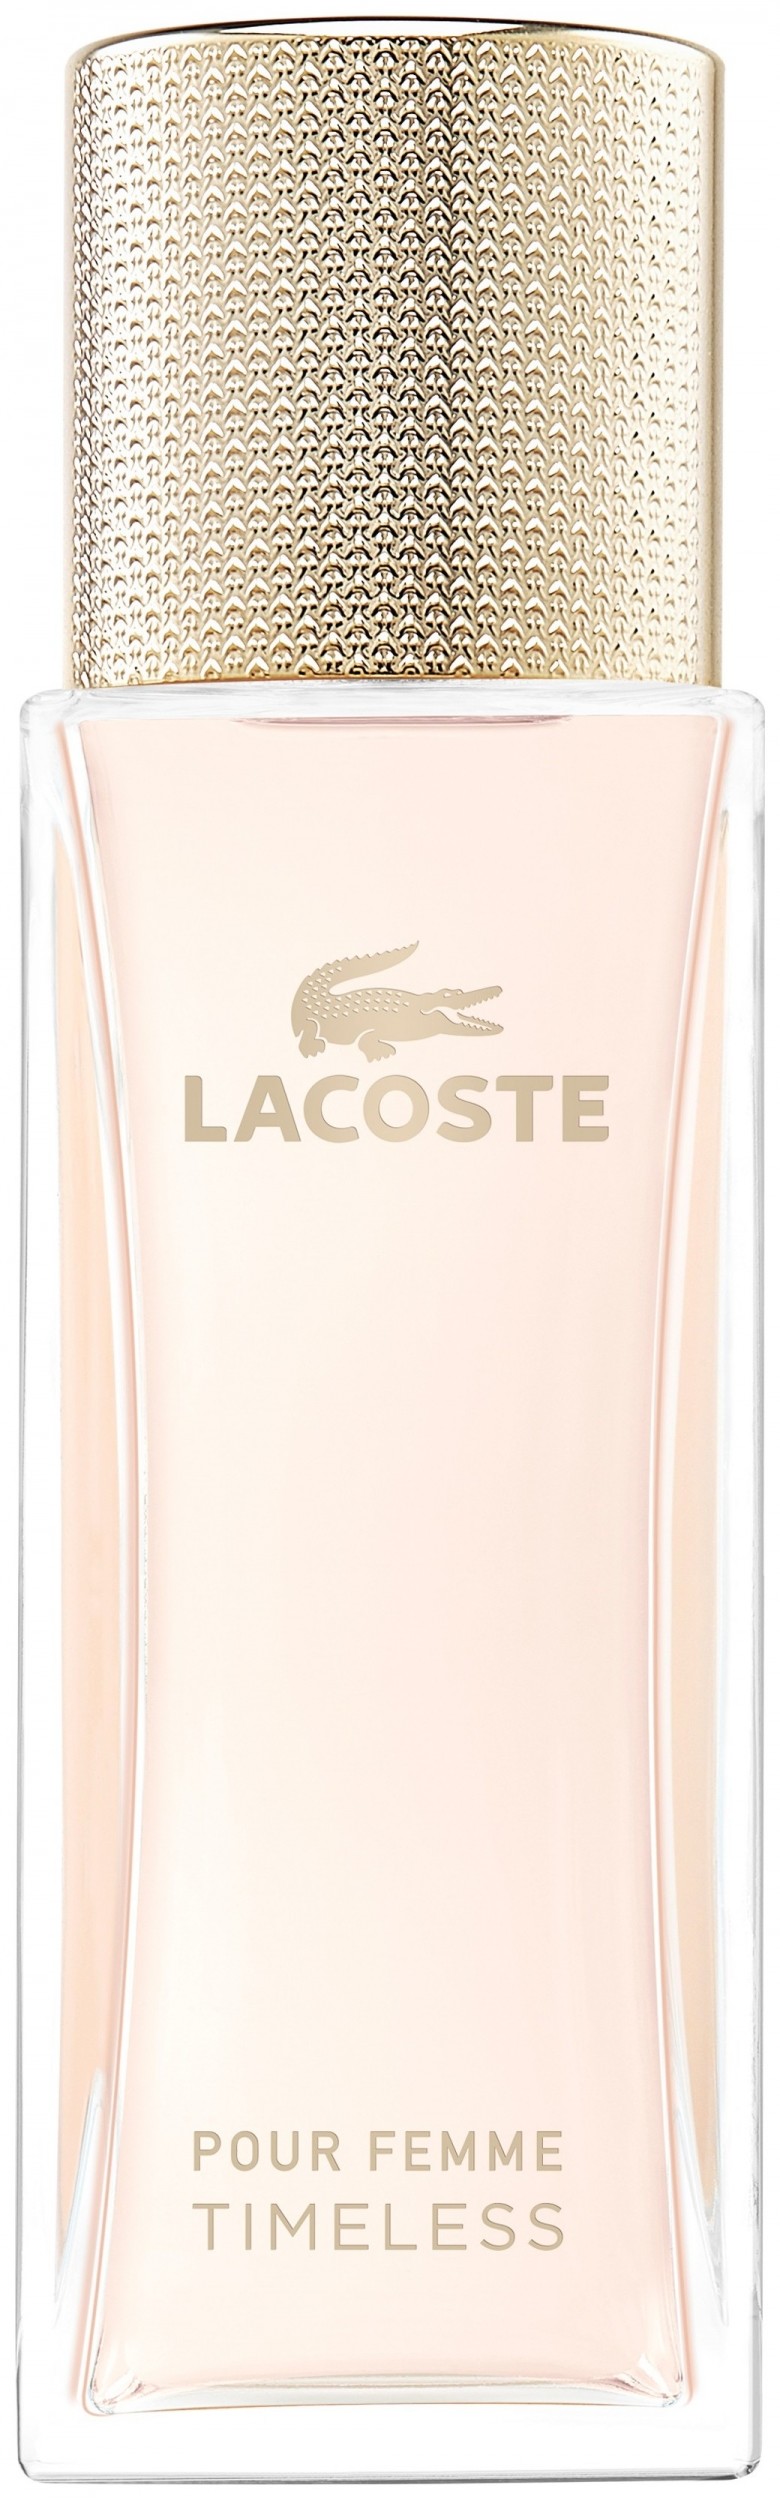 Парфюмерная вода Pour Femme Timeless Lacoste